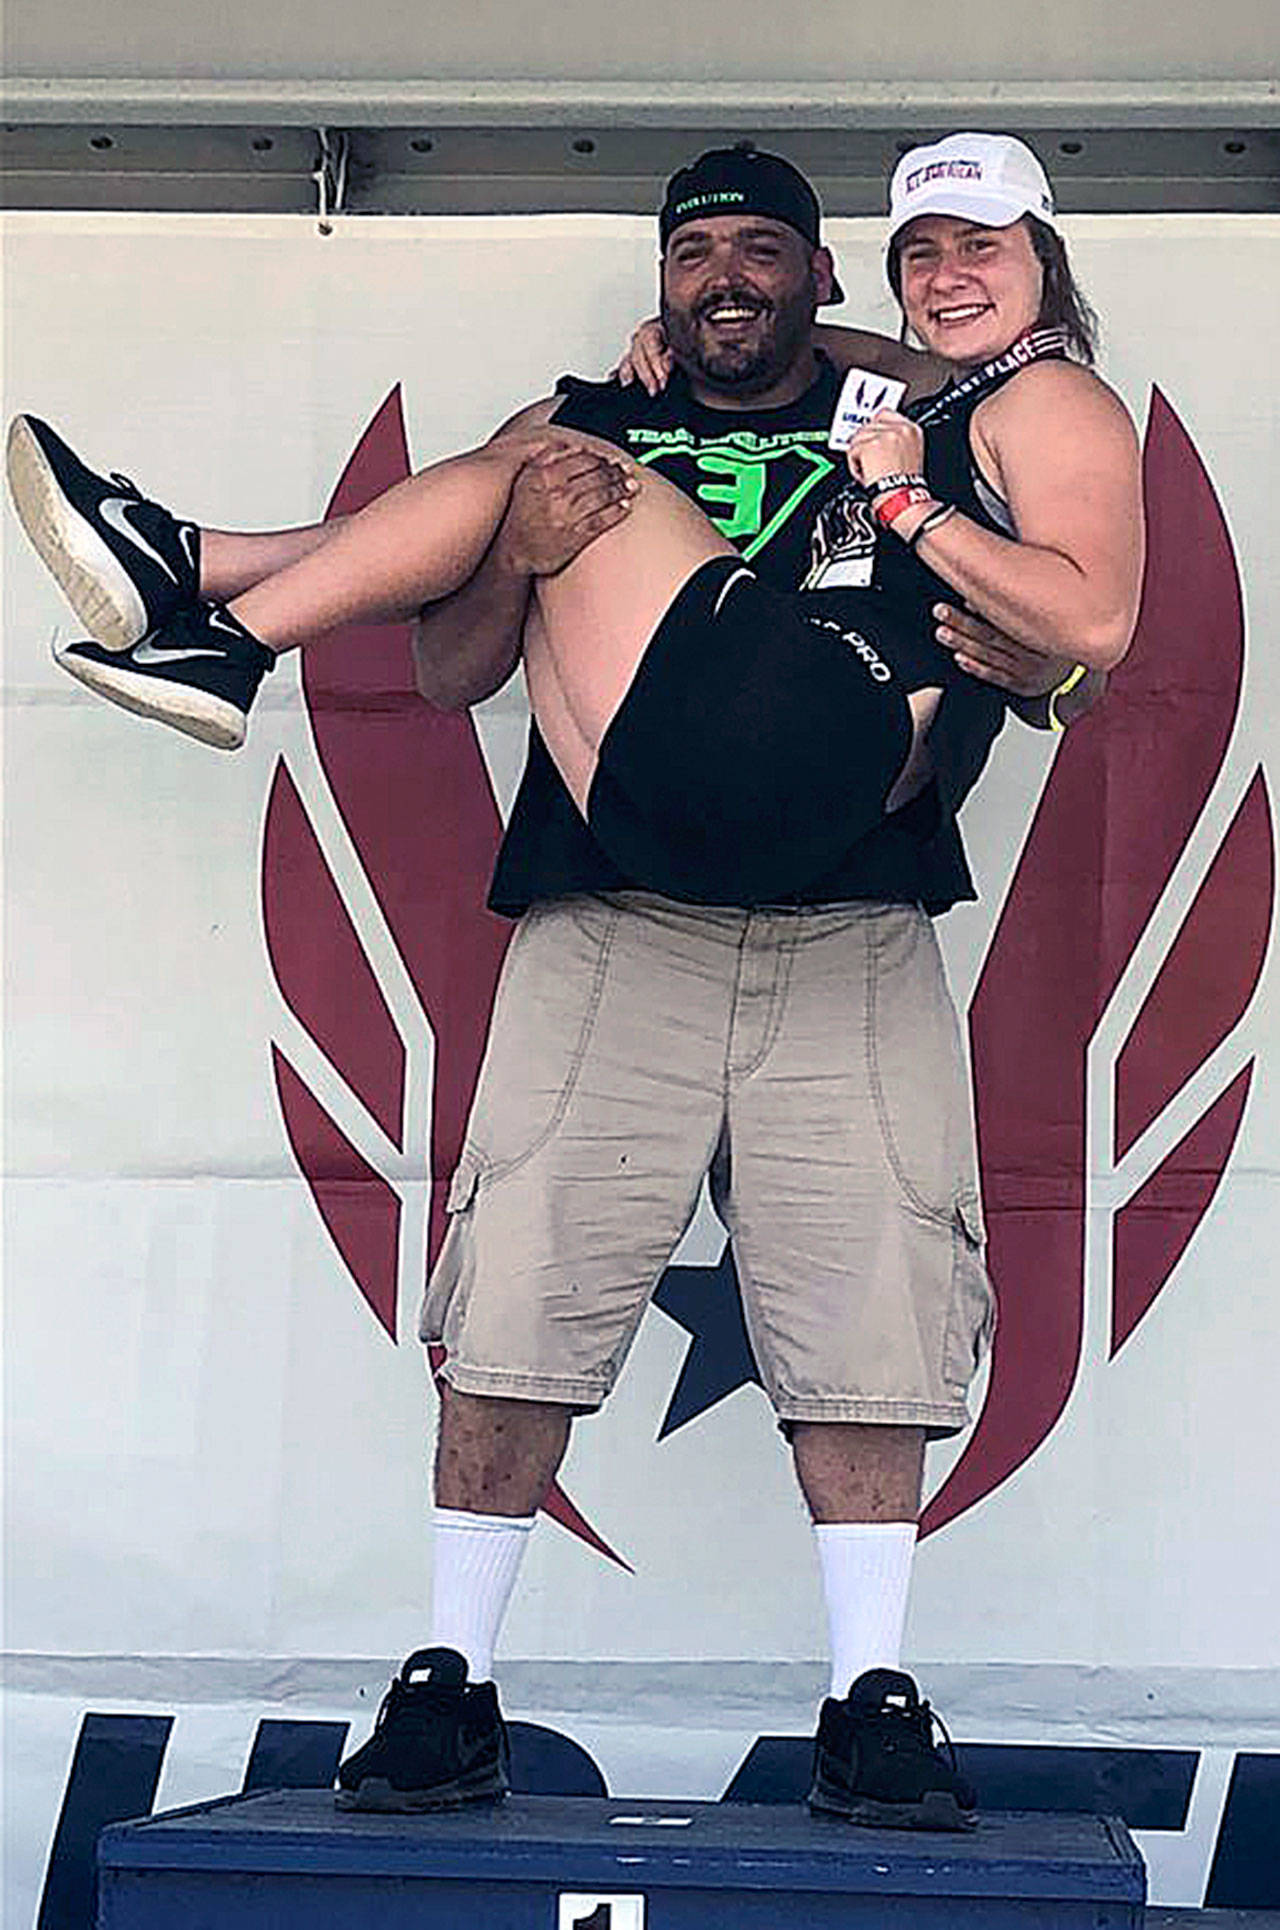 Team Evolution head coach Shaun Straka holds one of his athletes, Karlee Freeman, after Freeman won a Junior Olympic national championship in the discus throw in July. (Photo courtesy of Team Evolution Athletics)